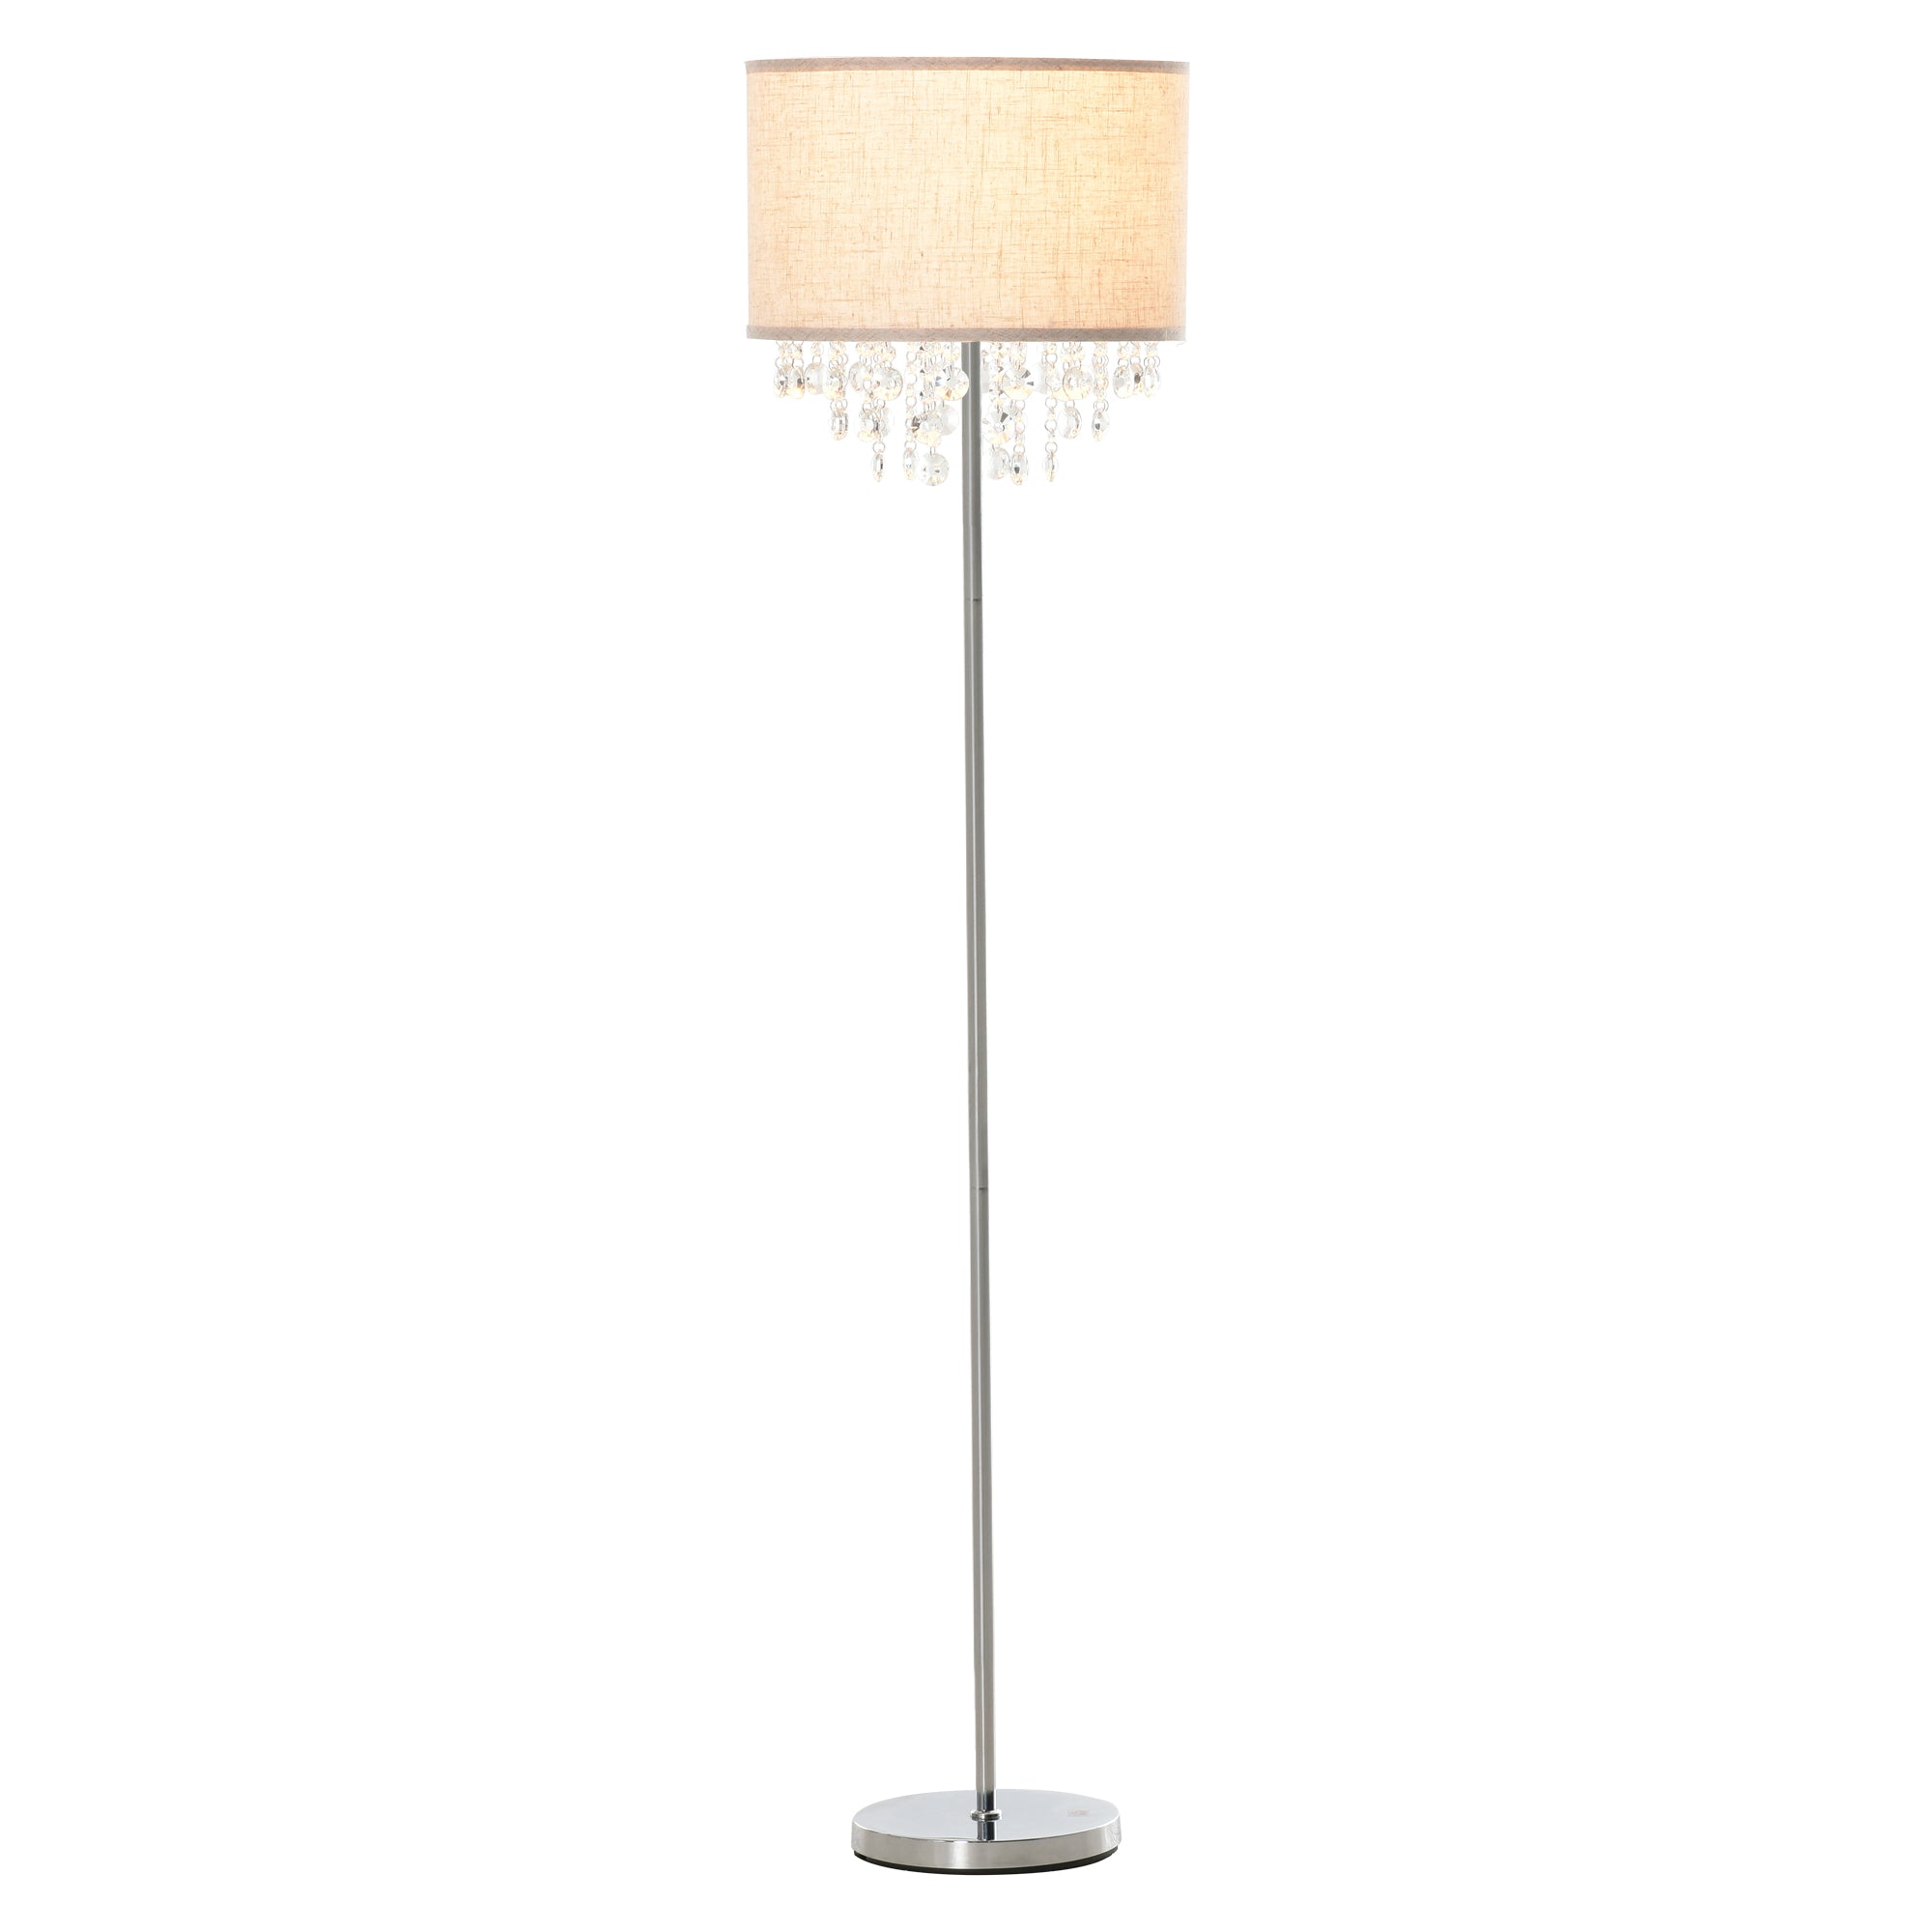 Modern Steel Floor Lamp with Crystal Pendant Fabric Lampshade Floor Switch, Home Style Standing Light, Silver and Cream White  AOSOM   